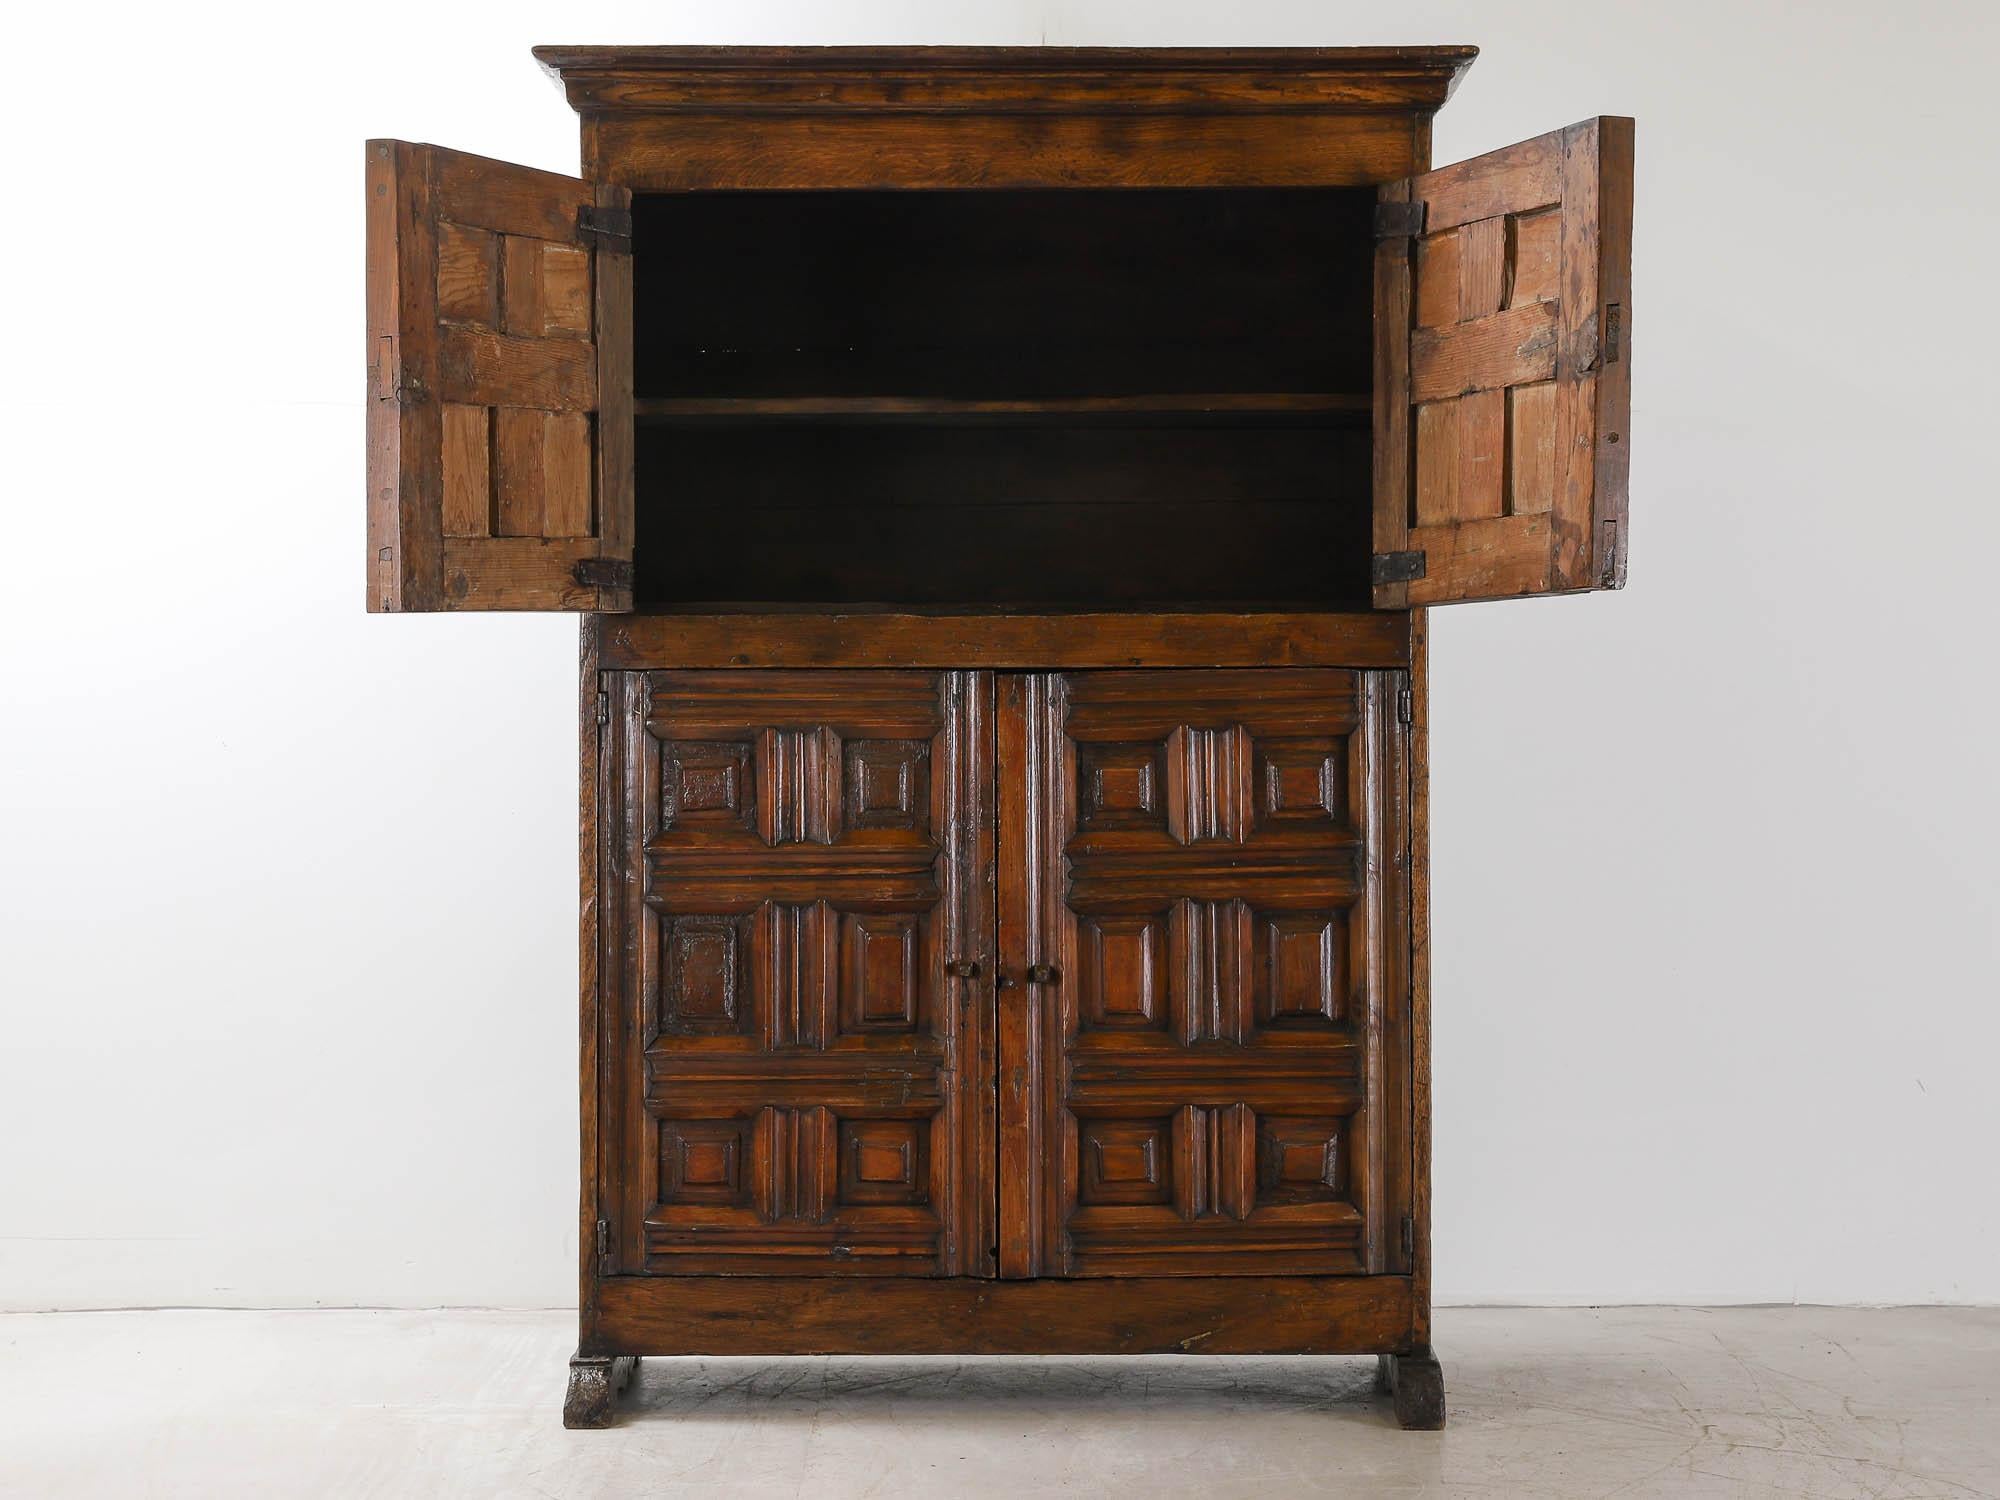 Northern Spanish 19th Century Carved Oak and Pine Cabinet In Good Condition For Sale In London, Charterhouse Square